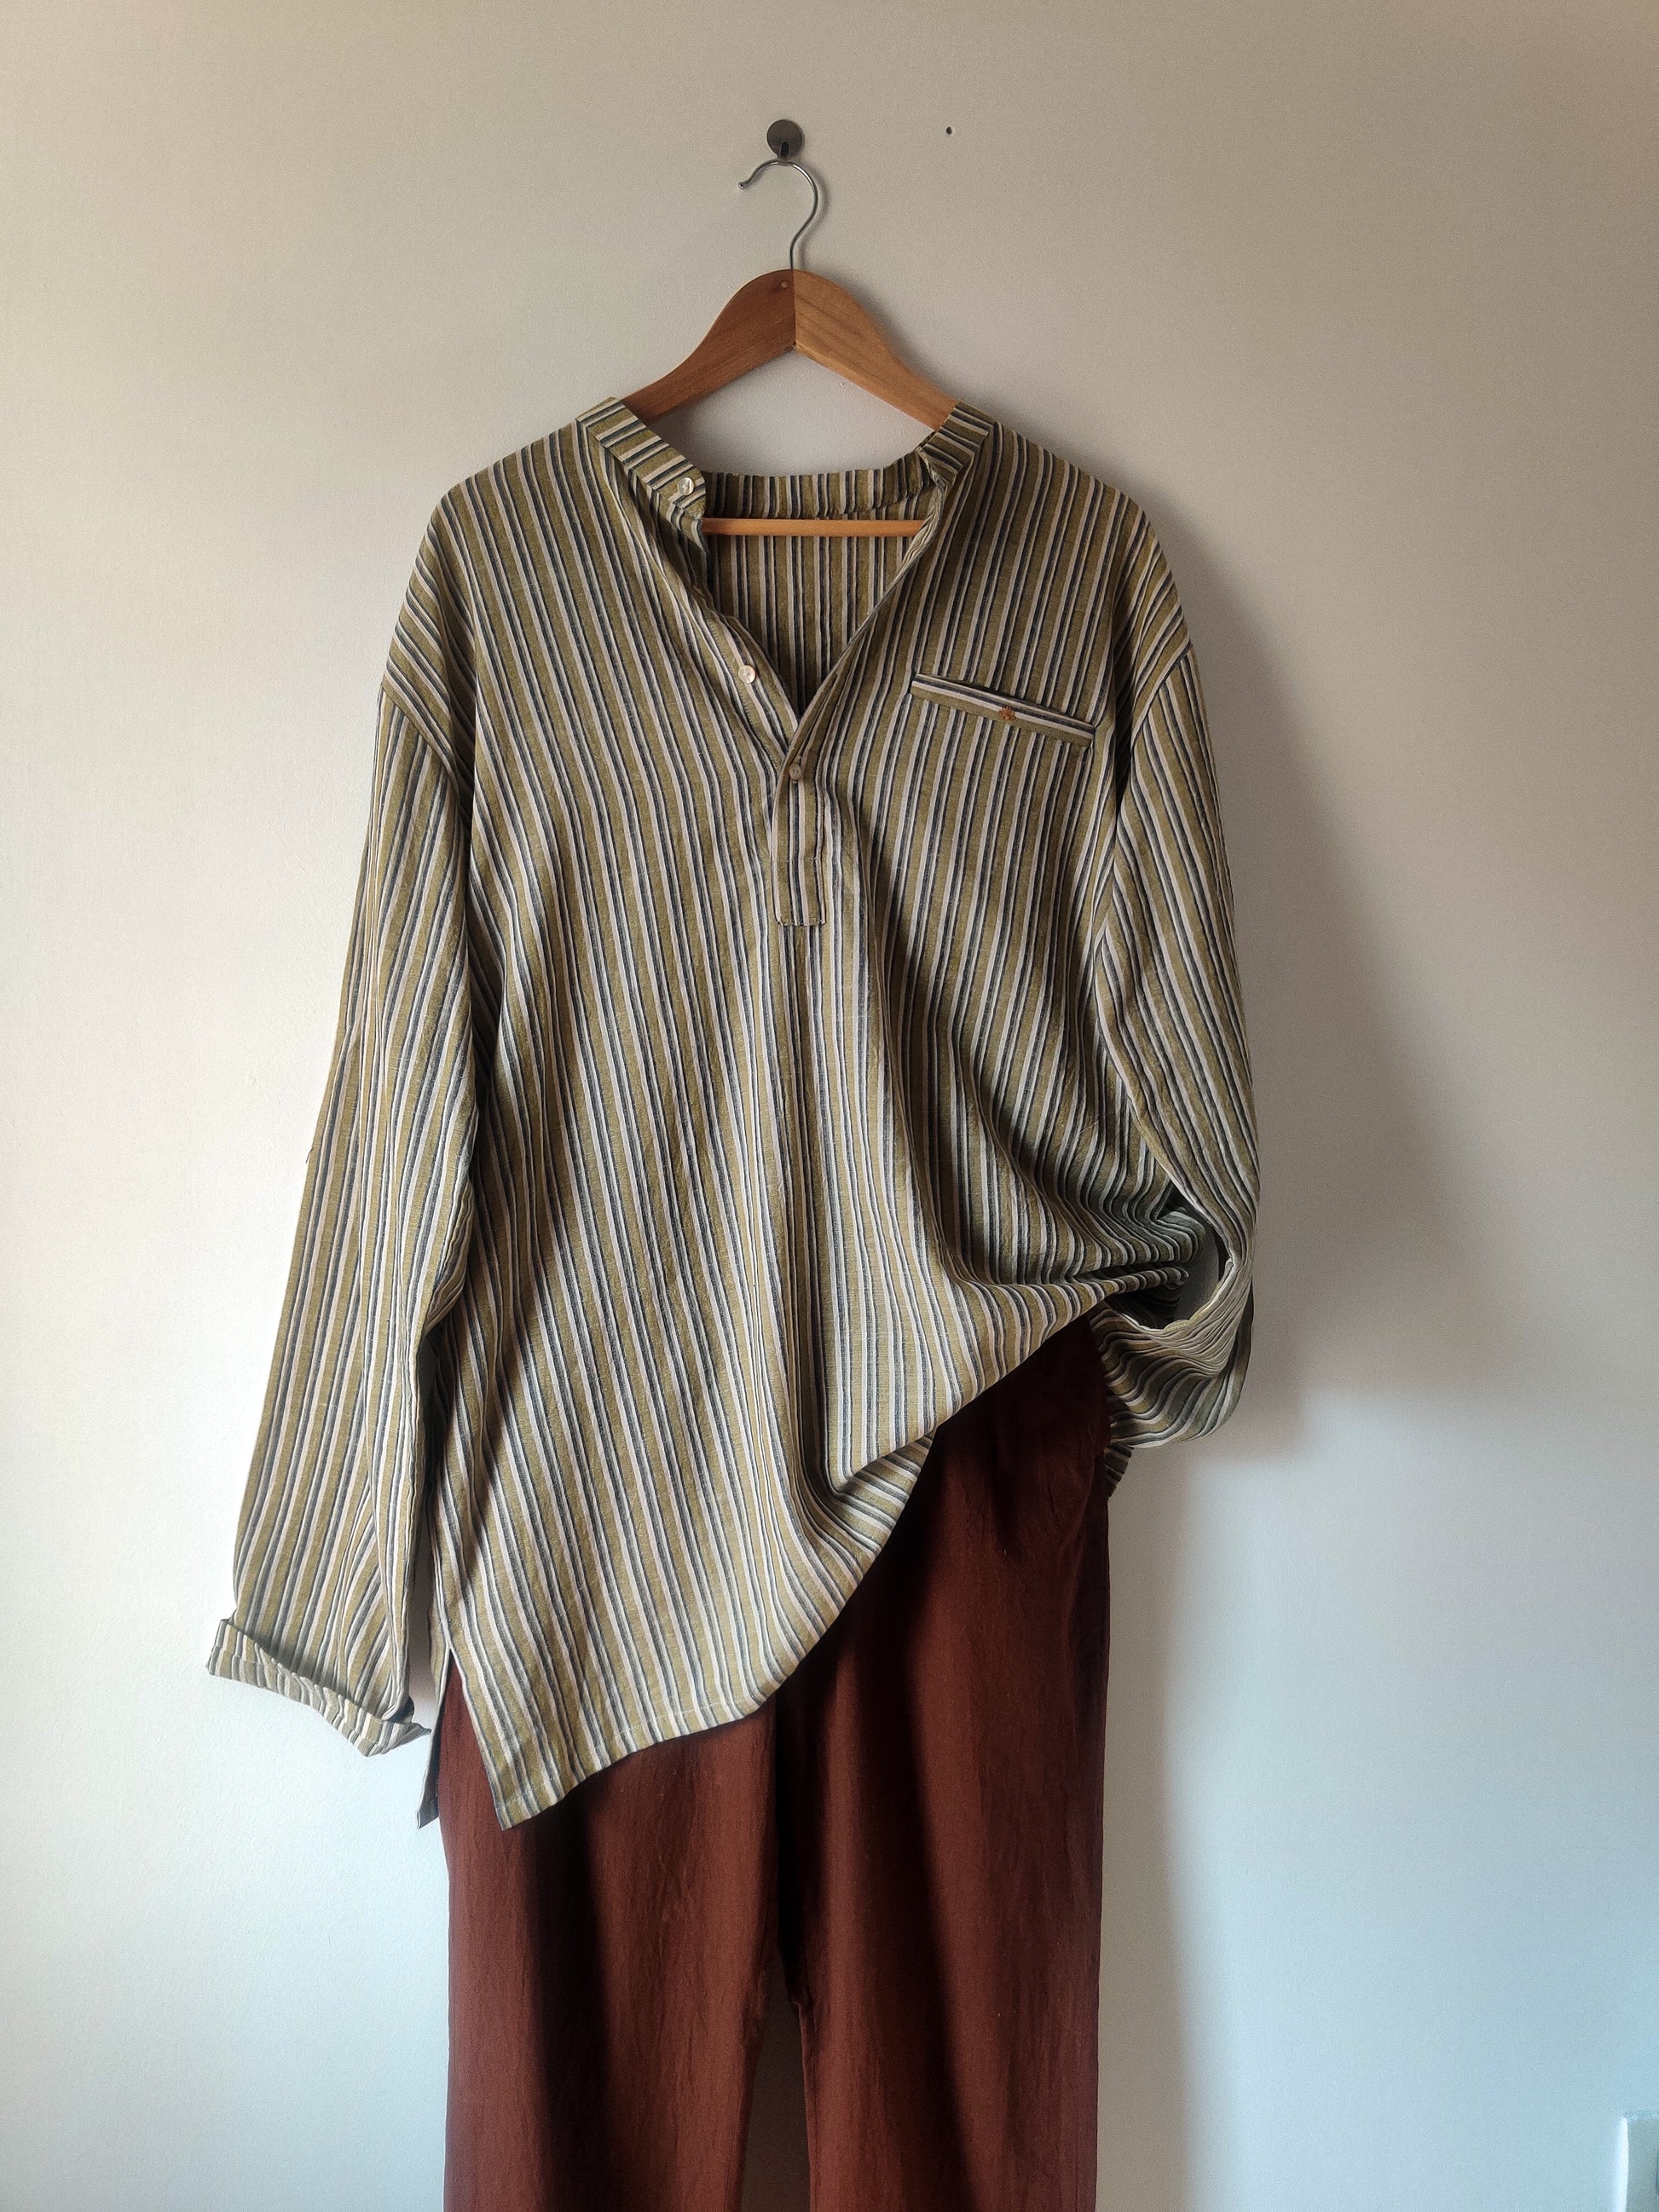 Green And Brown Cotton Kurta at Kamakhyaa by Deeta Clothing. This item is Brown, Casual Wear, Green, Handwoven Cotton, Kurtas, Menswear, Natural with azo dyes, Relaxed Fit, Shibui AW22, Stripes, Tops